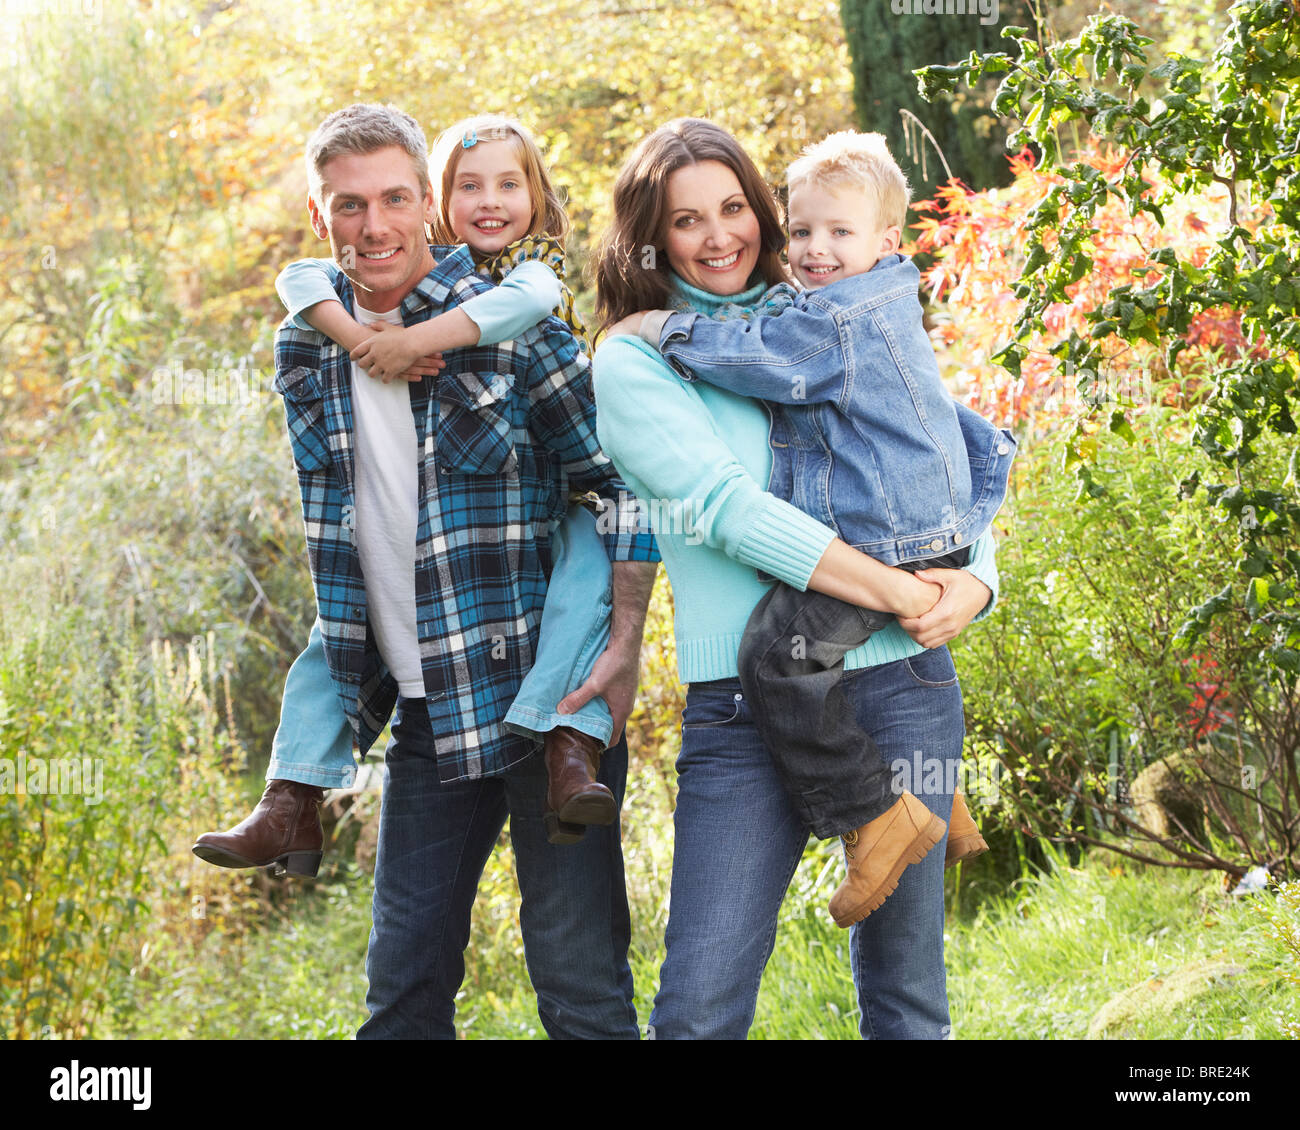 Family Group Outdoors In Autumn Landscape With Parents Giving Chiildren Piggyback Stock Photo